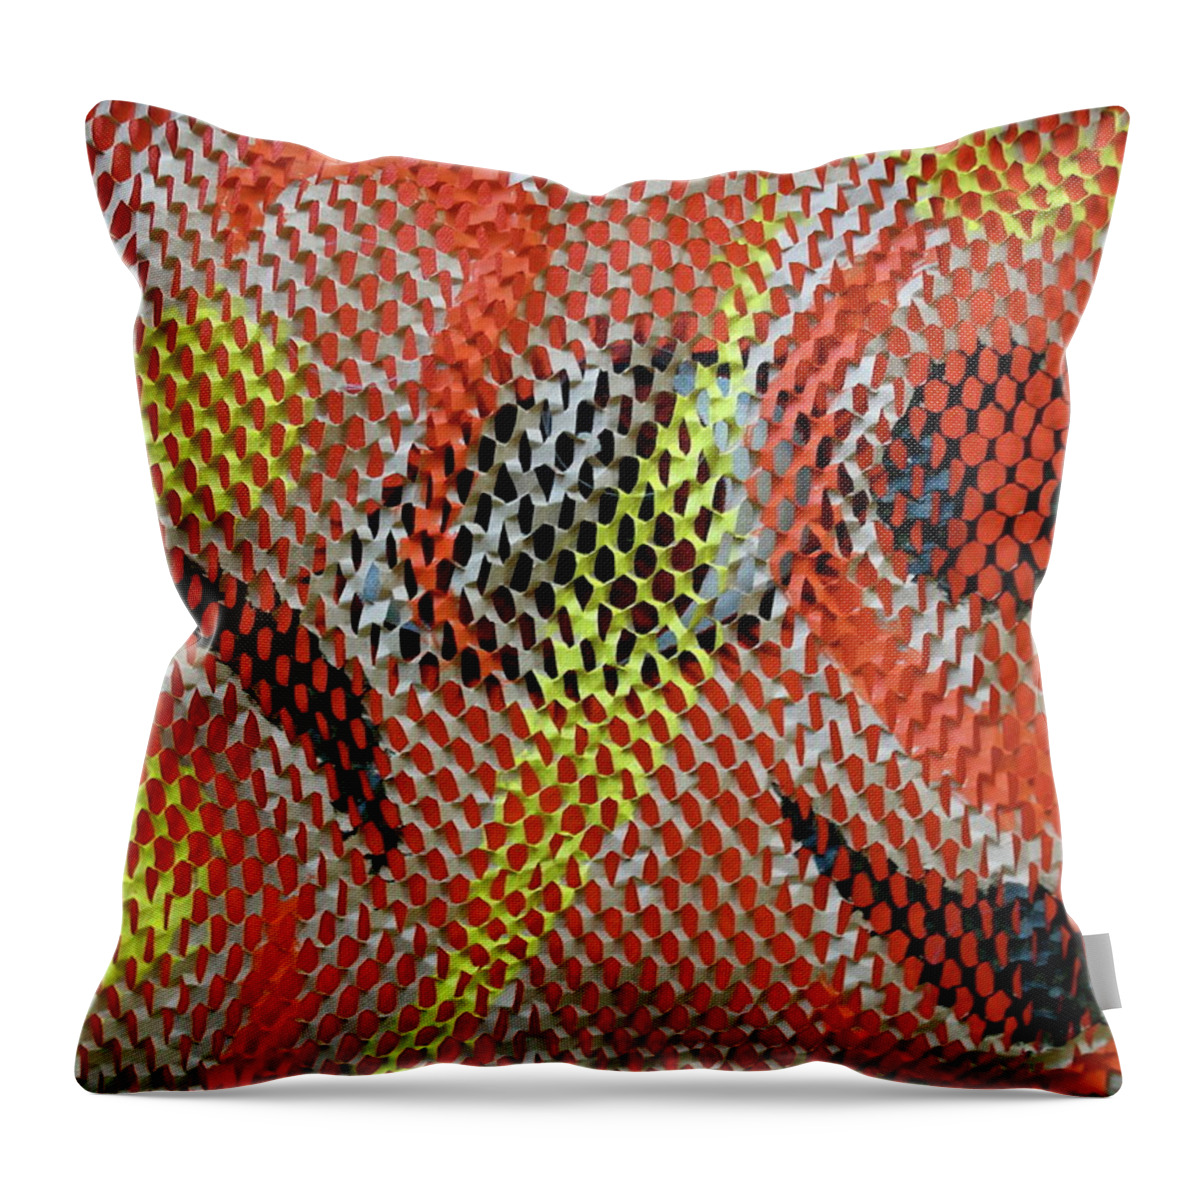 Mixed Media Throw Pillow featuring the mixed media Outside Looking In by Michele Myers